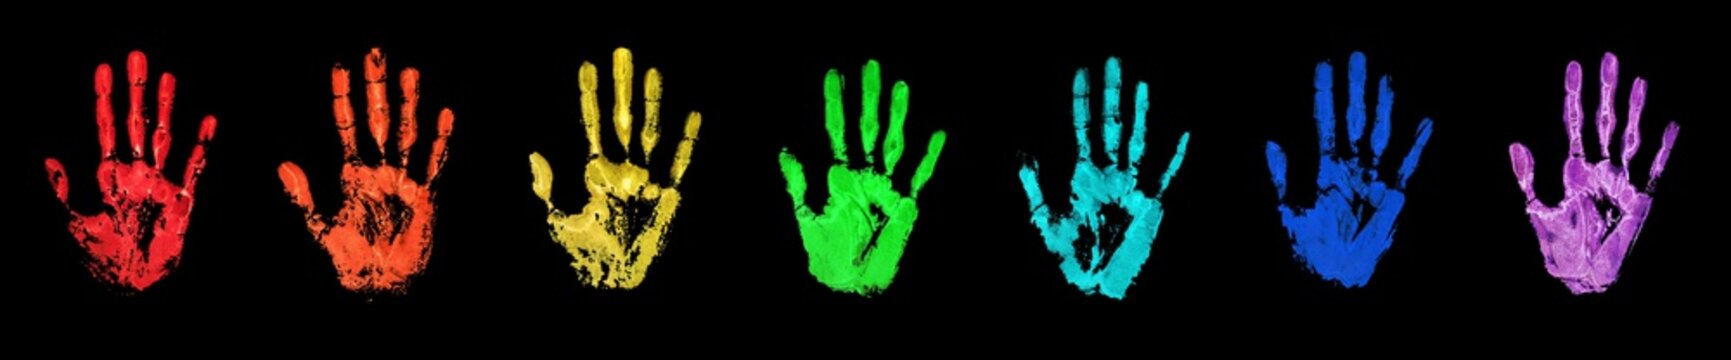 Rainbow color human hand print set black background isolated closeup, colorful watercolor drawn handprint illustration collection, palm and fingers silhouette, hand shape painted stamp, imprints group